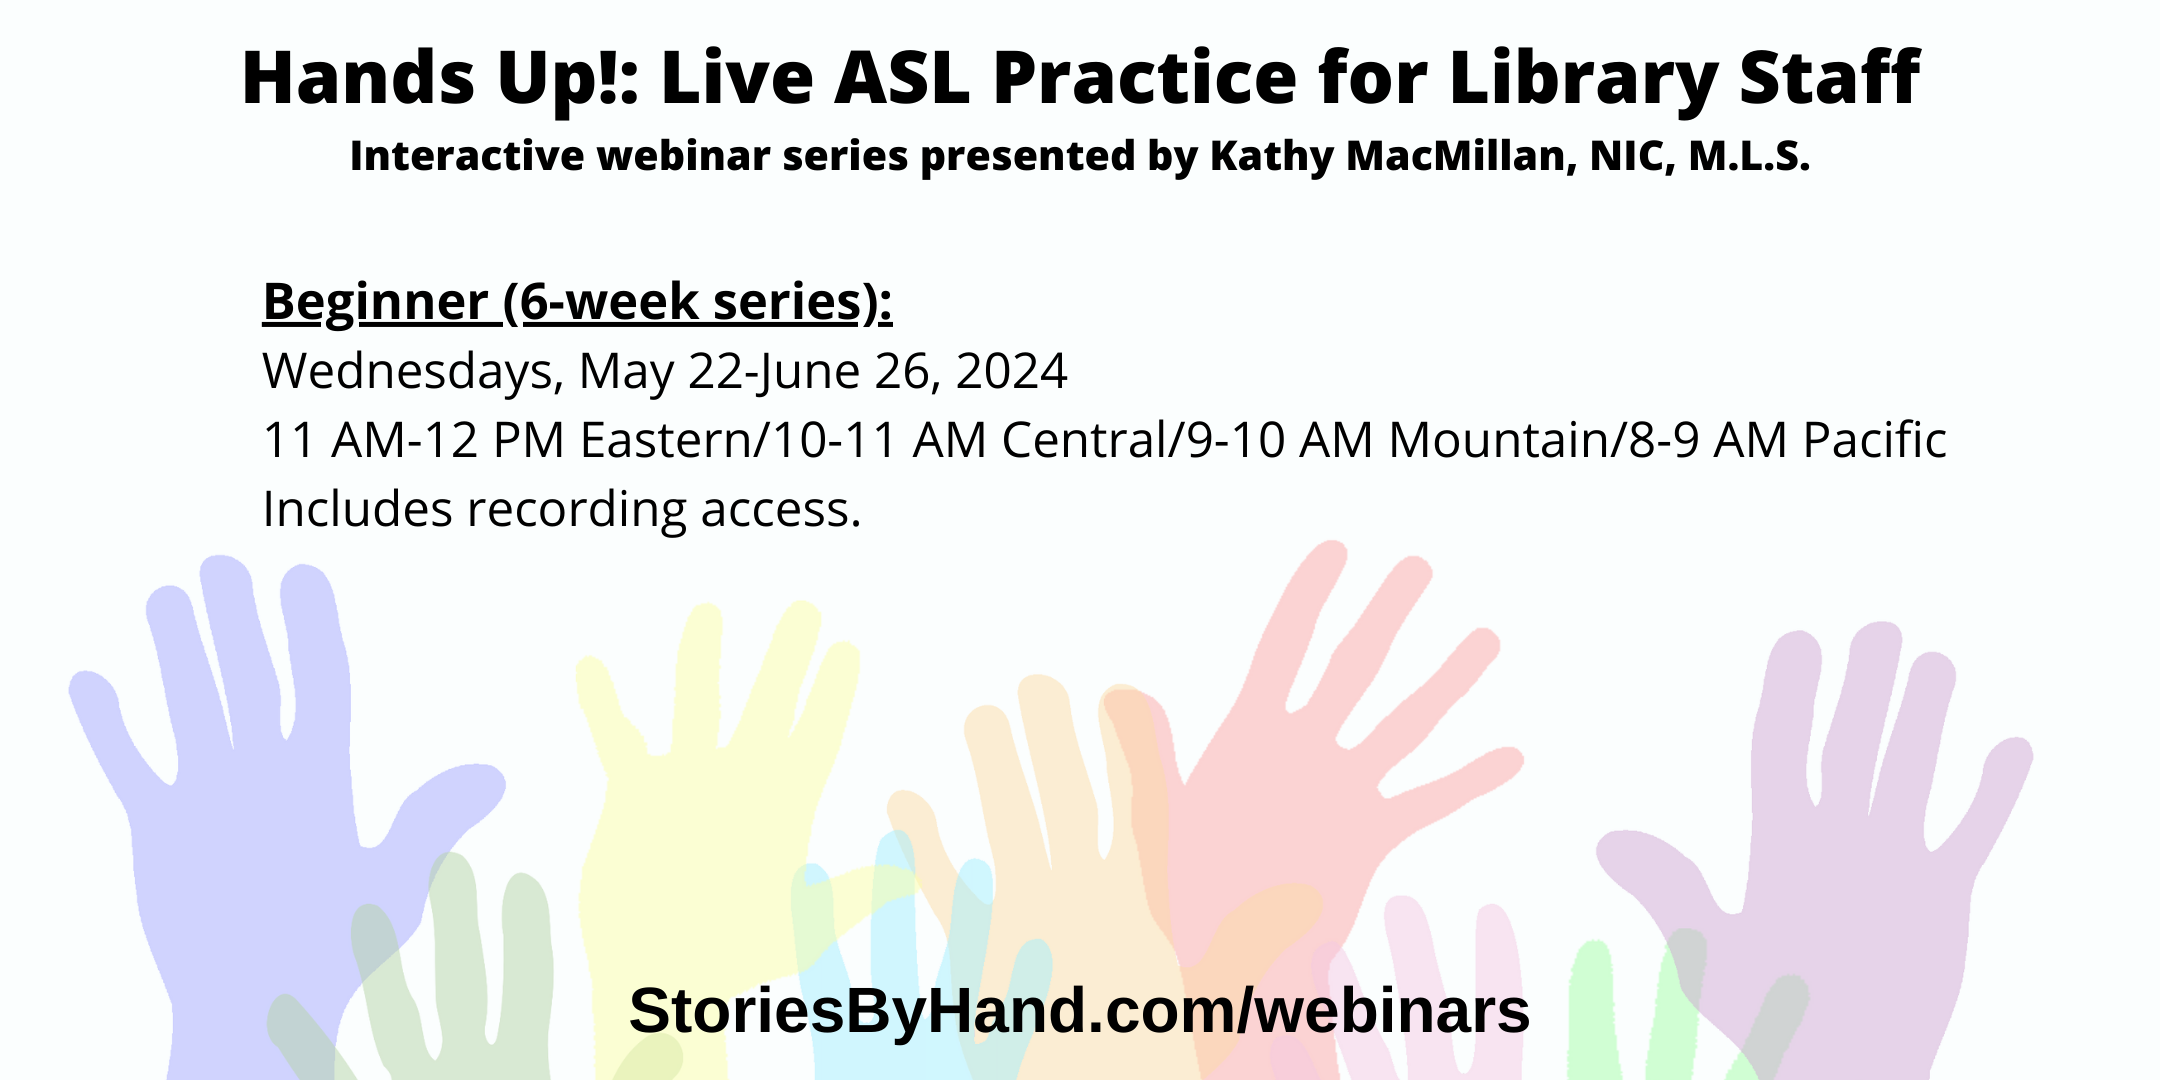 Text appears against a background of colorful hands: Hands Up: Live ASL Practice for Library Staff. Interactive webinar series presented by Kathy MacMillan, NIC, M.L.S. Beginner (6 week series): Wednesdays, May 22-June 26, 2024 11 AM-12 PM Eastern/10-11 AM Central/9-10 AM Mountain/8-9 AM Pacific. Includes recording access. StoriesByHand.com/webinars.